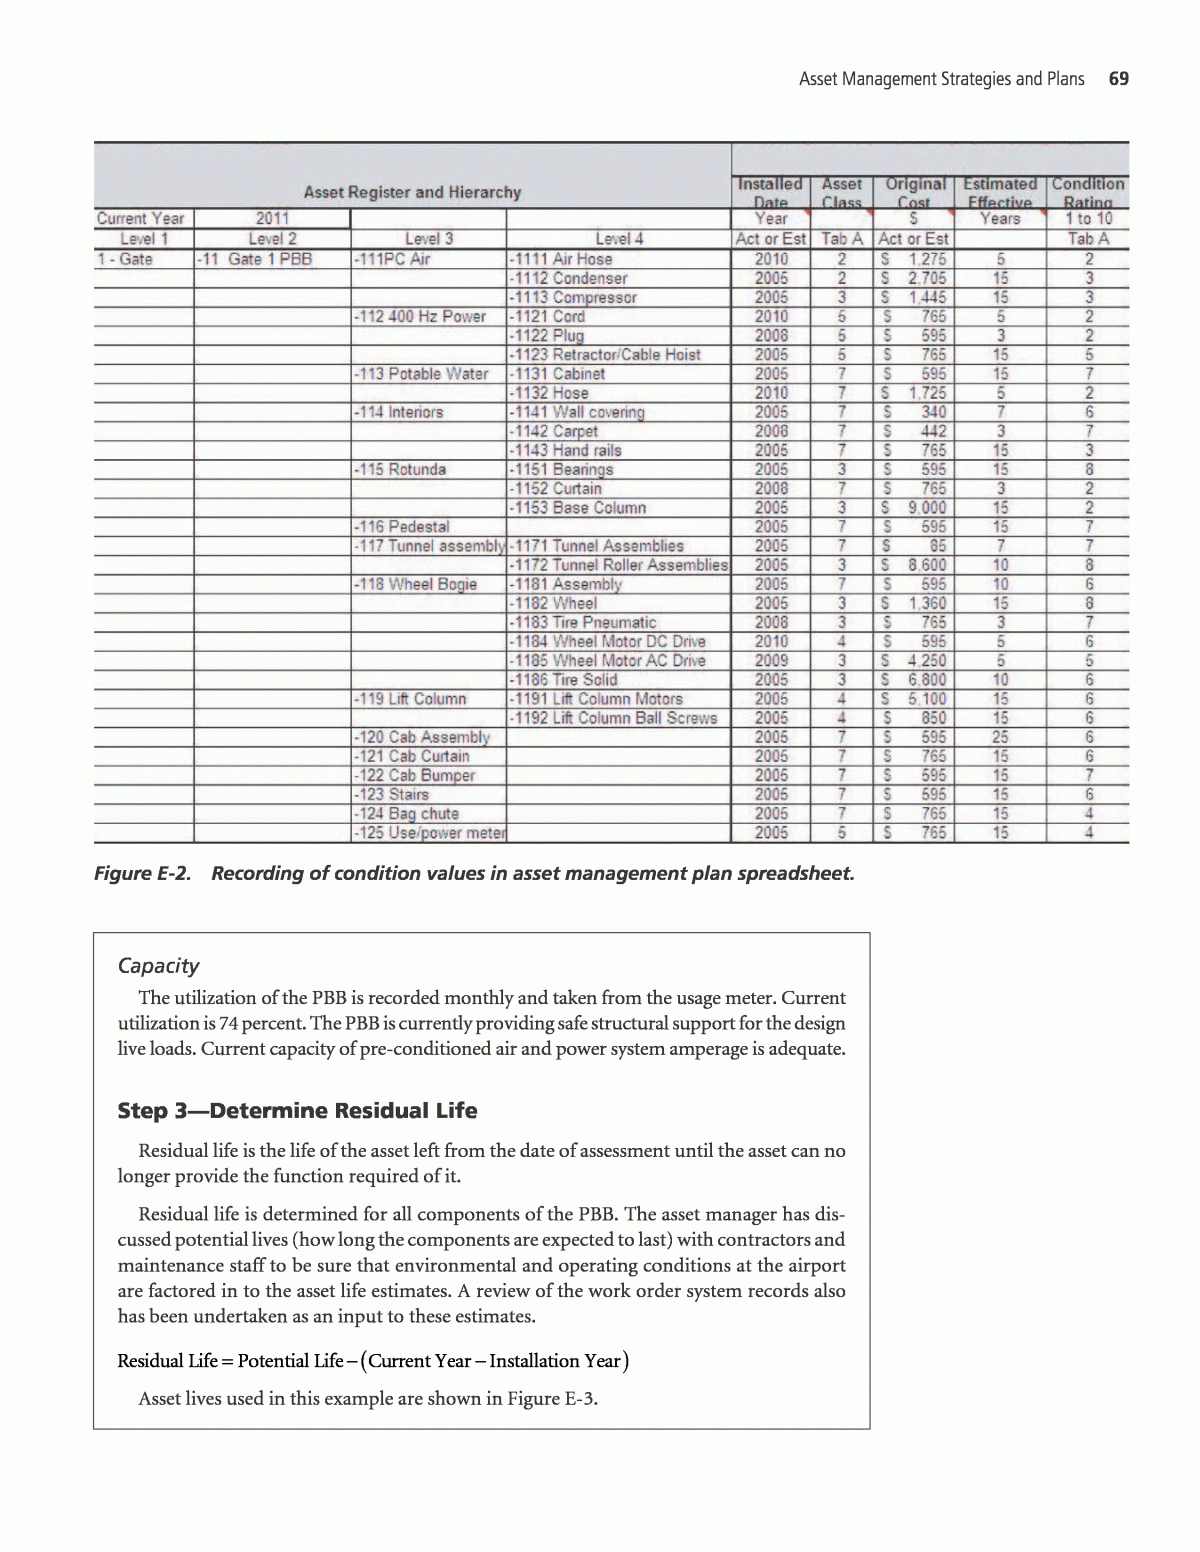 Overtime Equalization Spreadsheet pertaining to Part 2  Asset And Infrastructure Management For Airports Guidebook